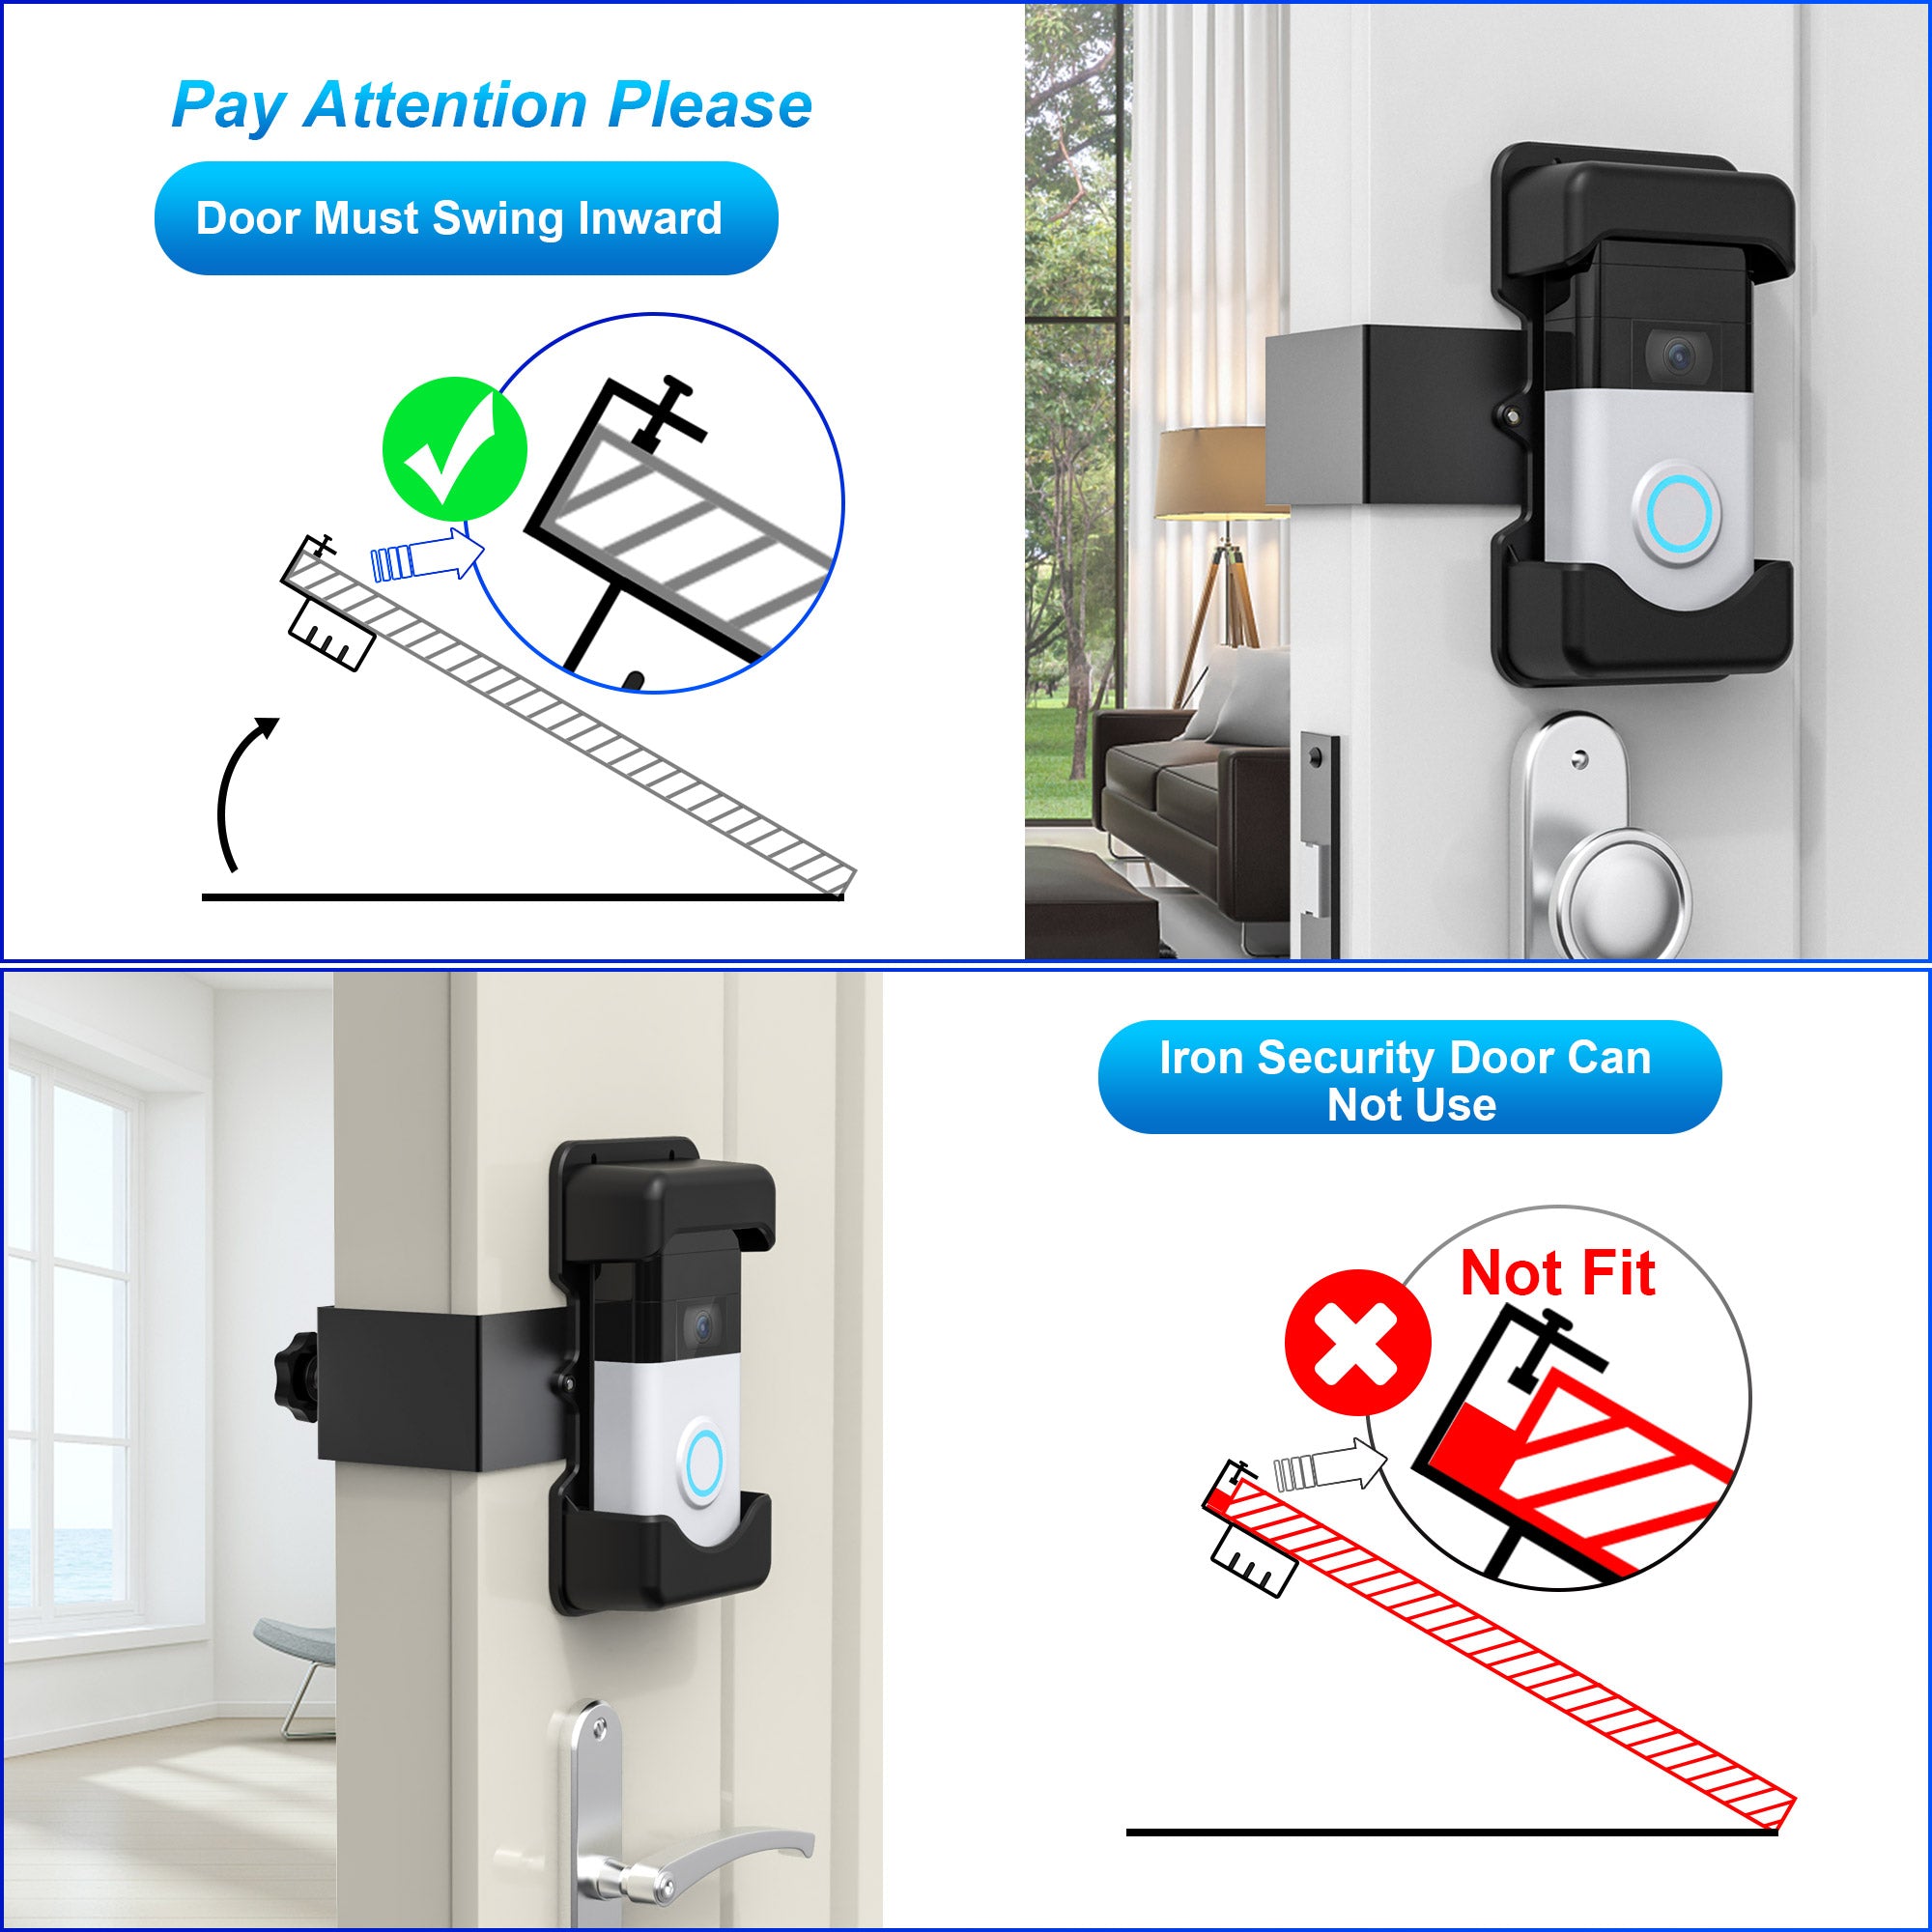 COOLWUFAN Anti-Theft Video Doorbell Mount, No-Drill Mounting Bracket for Most Brand Video Bell (Black)